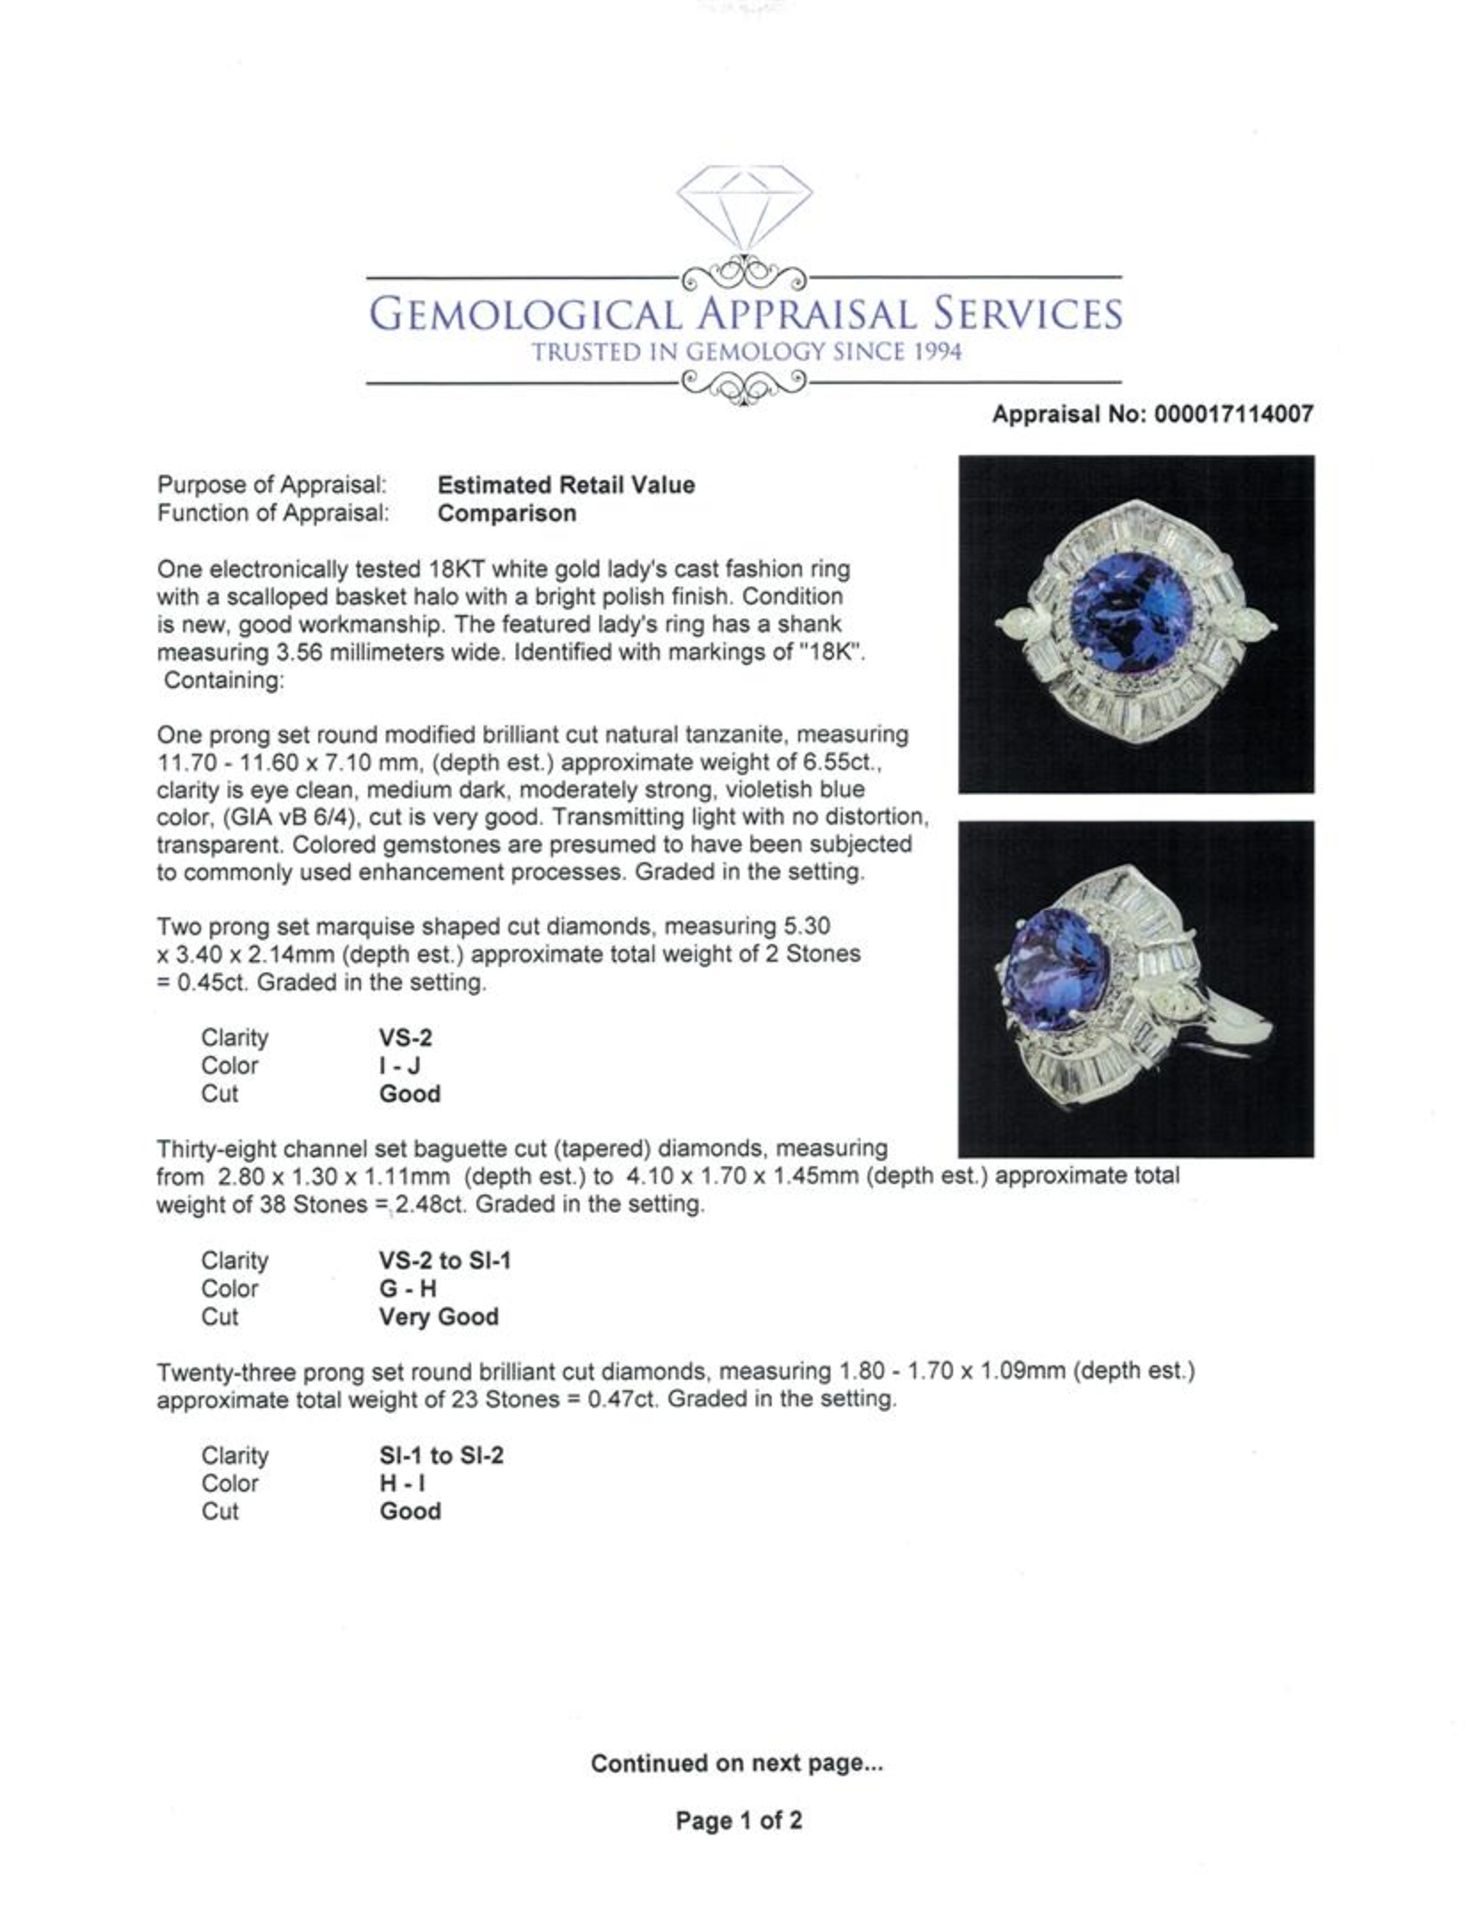 9.95 ctw Round Brilliant Tanzanite And Marquise Shaped Cut Diamond Ring - 18KT W - Image 5 of 6